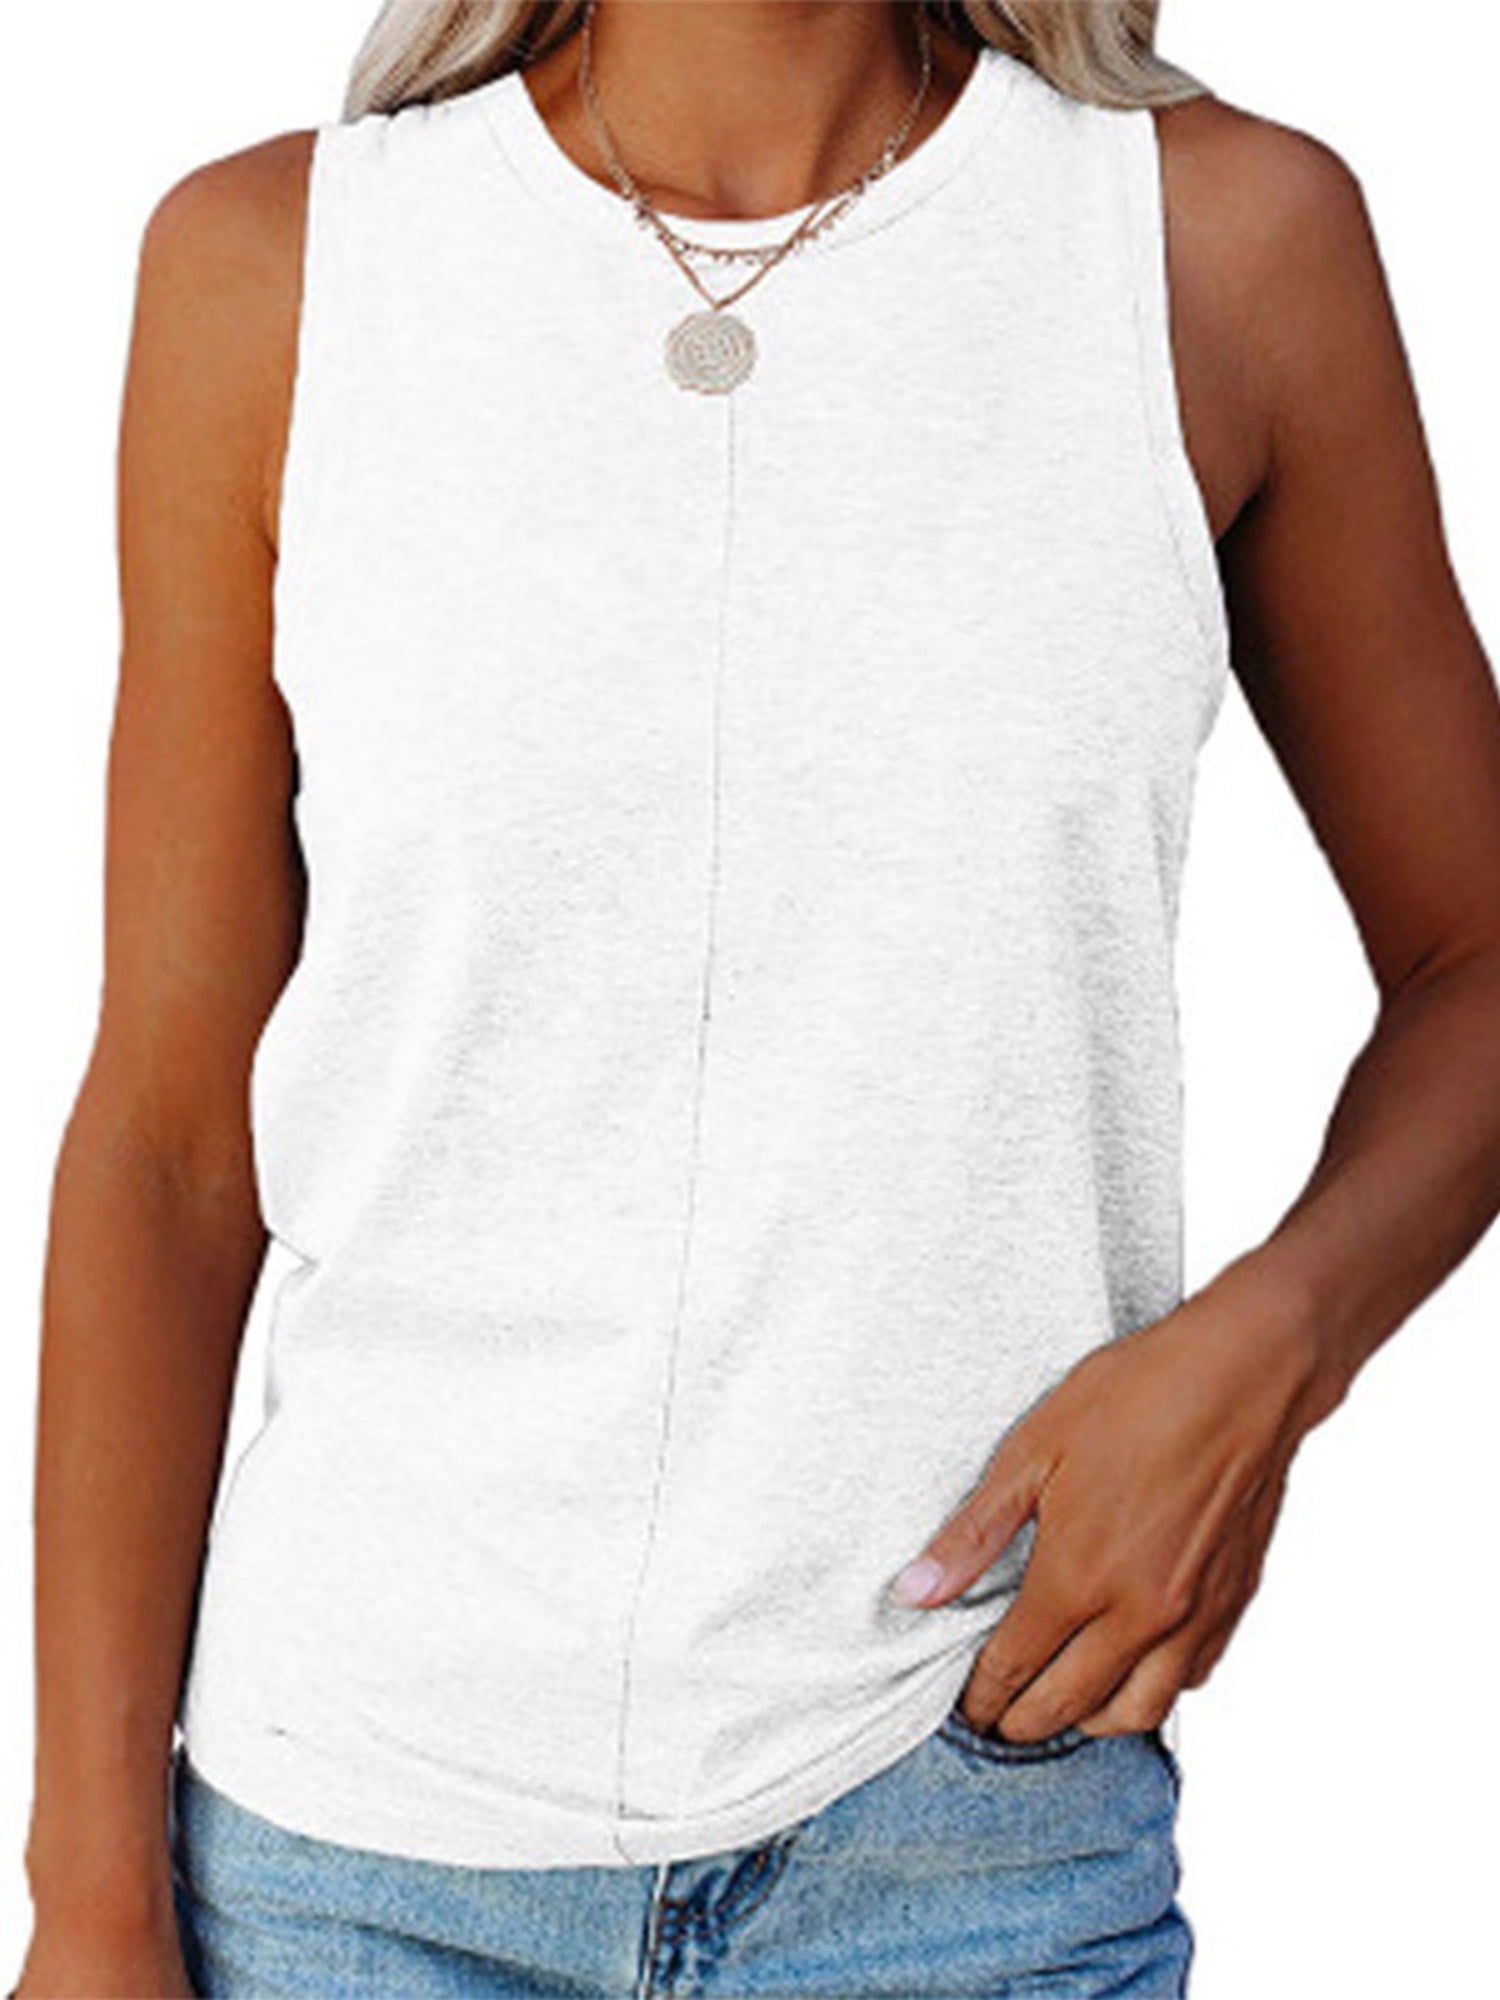  EVALESS Womens Fashion Tank Tops Summer Shirts for